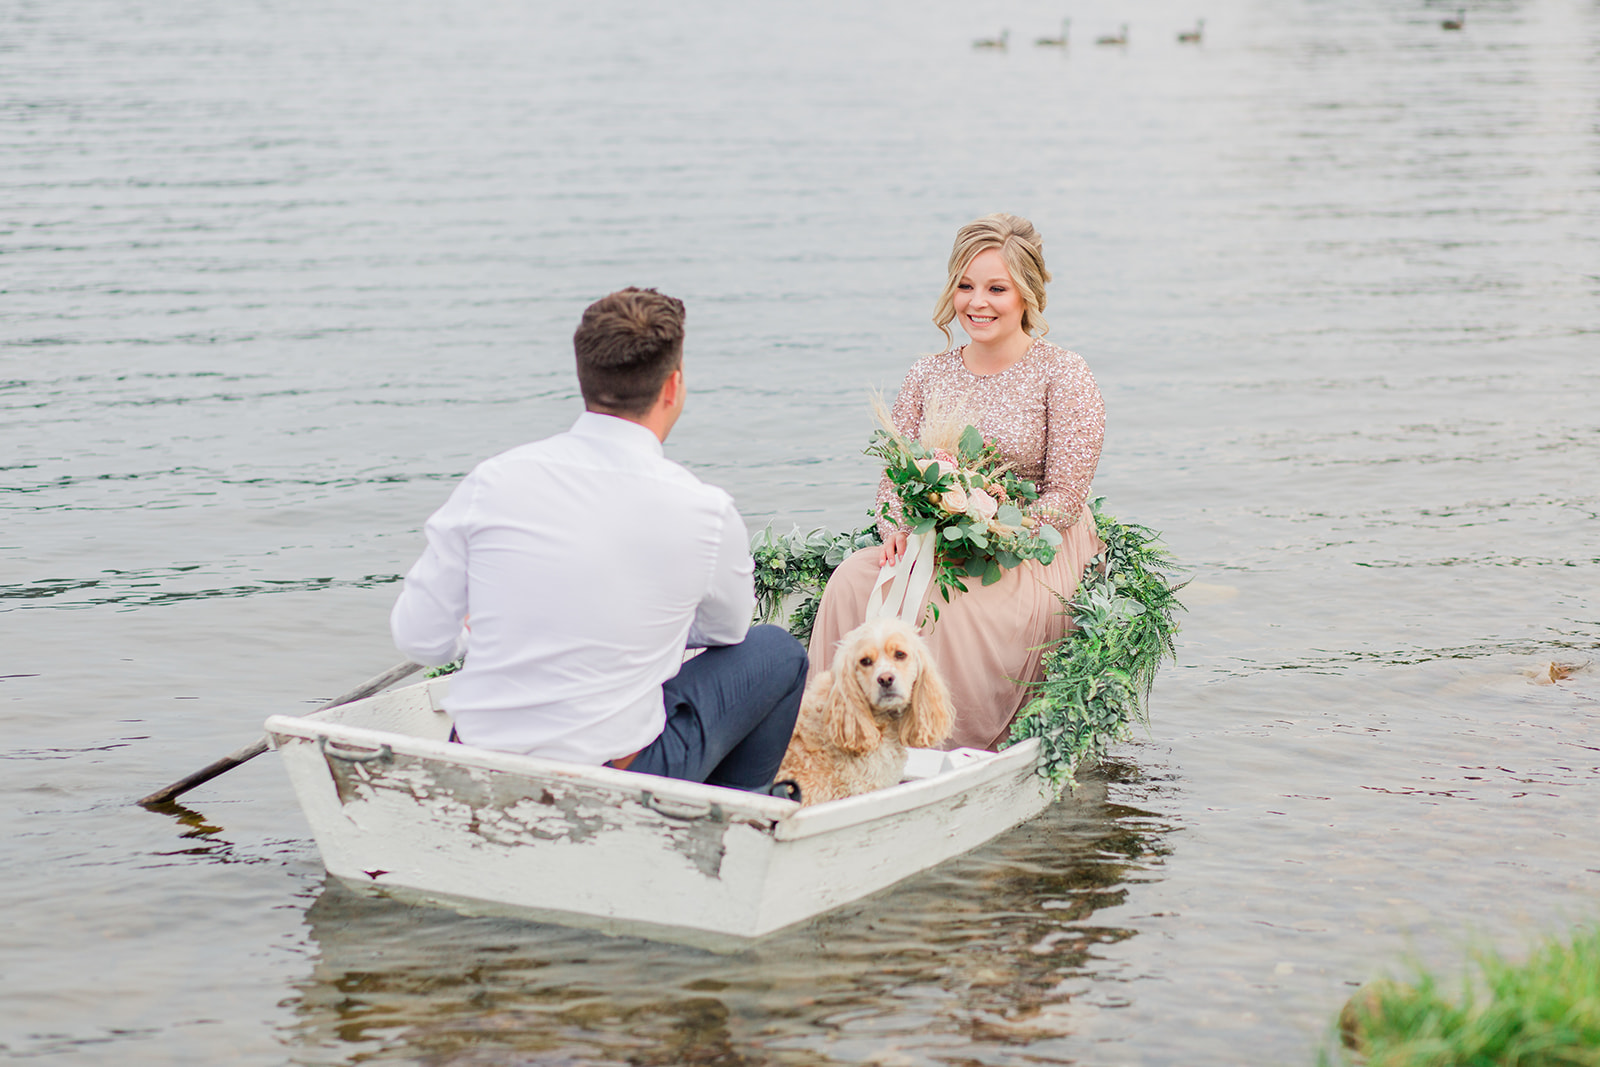 Rowboat and greenery wedding inspiration for those eloping lakeside